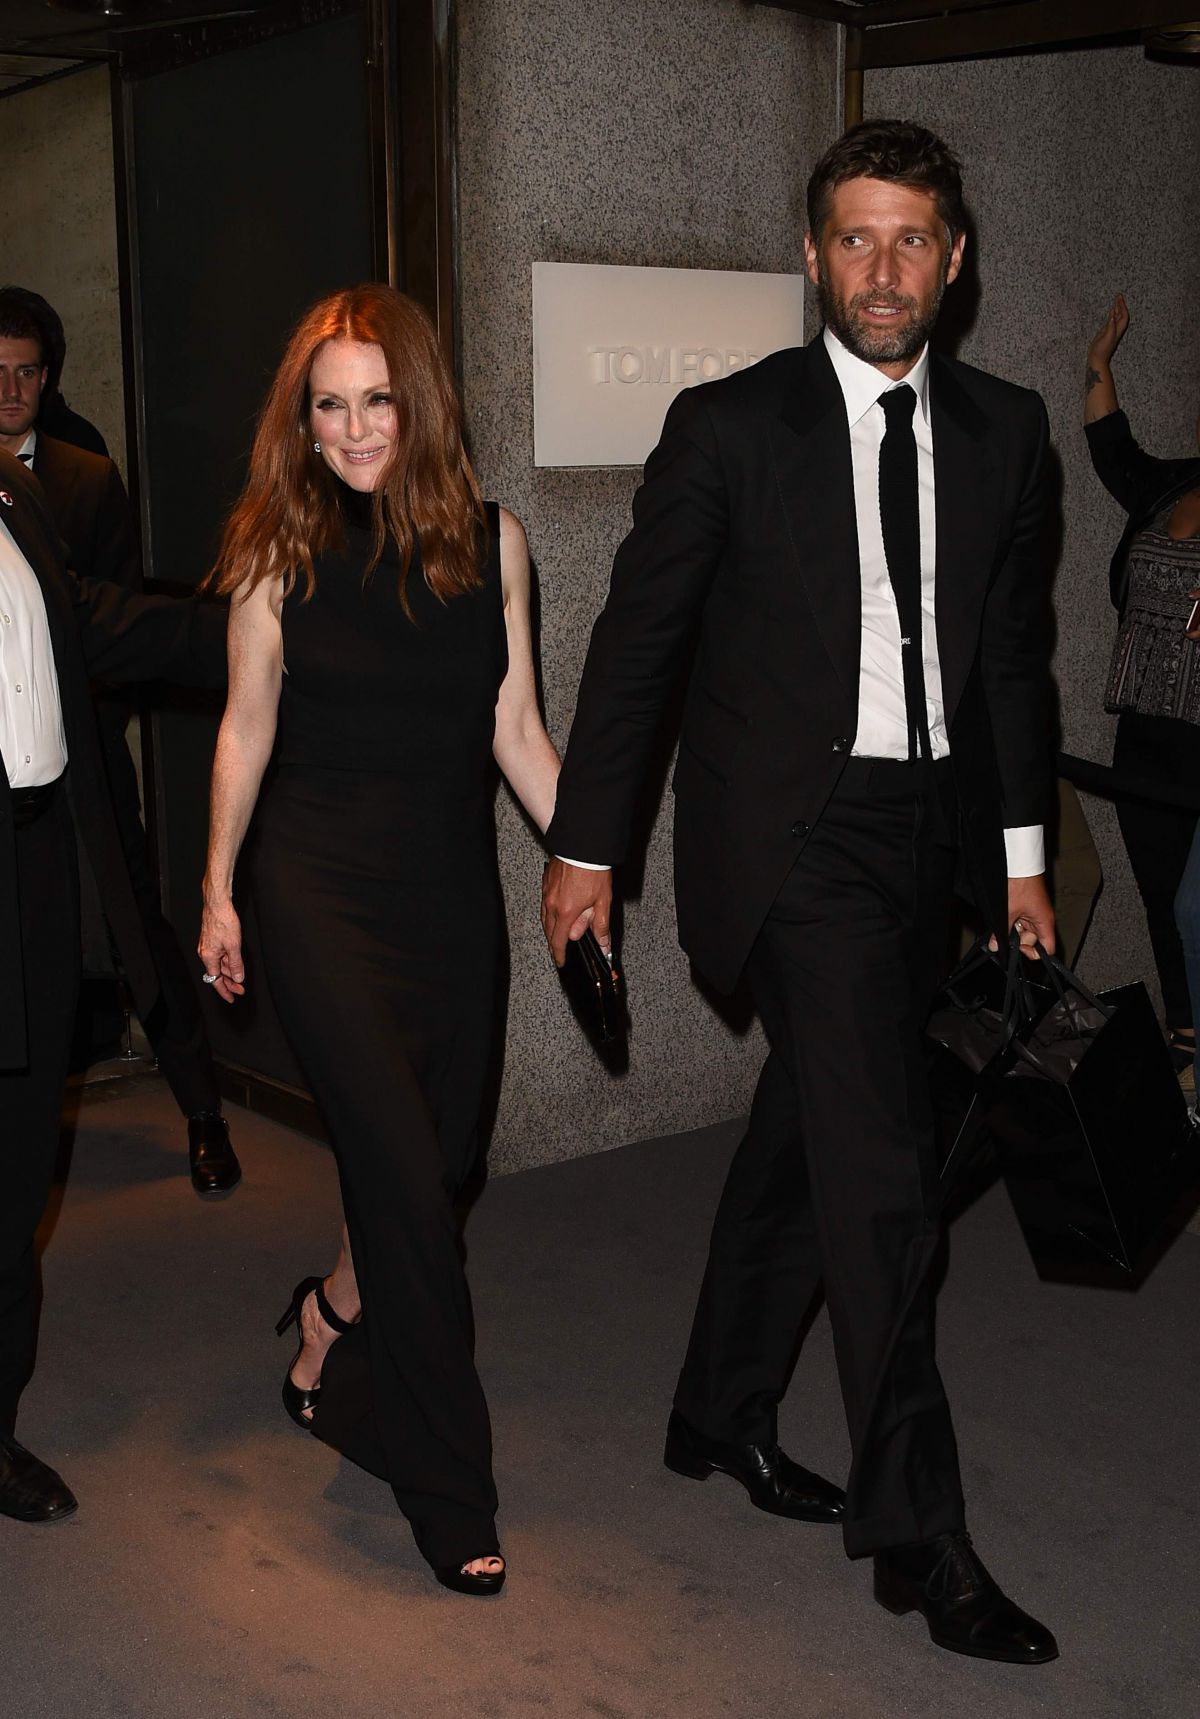 julianne-moore-at-tom-ford-fashion-show-at-new-york-fashion-week-09-07-2016_2  – HawtCelebs